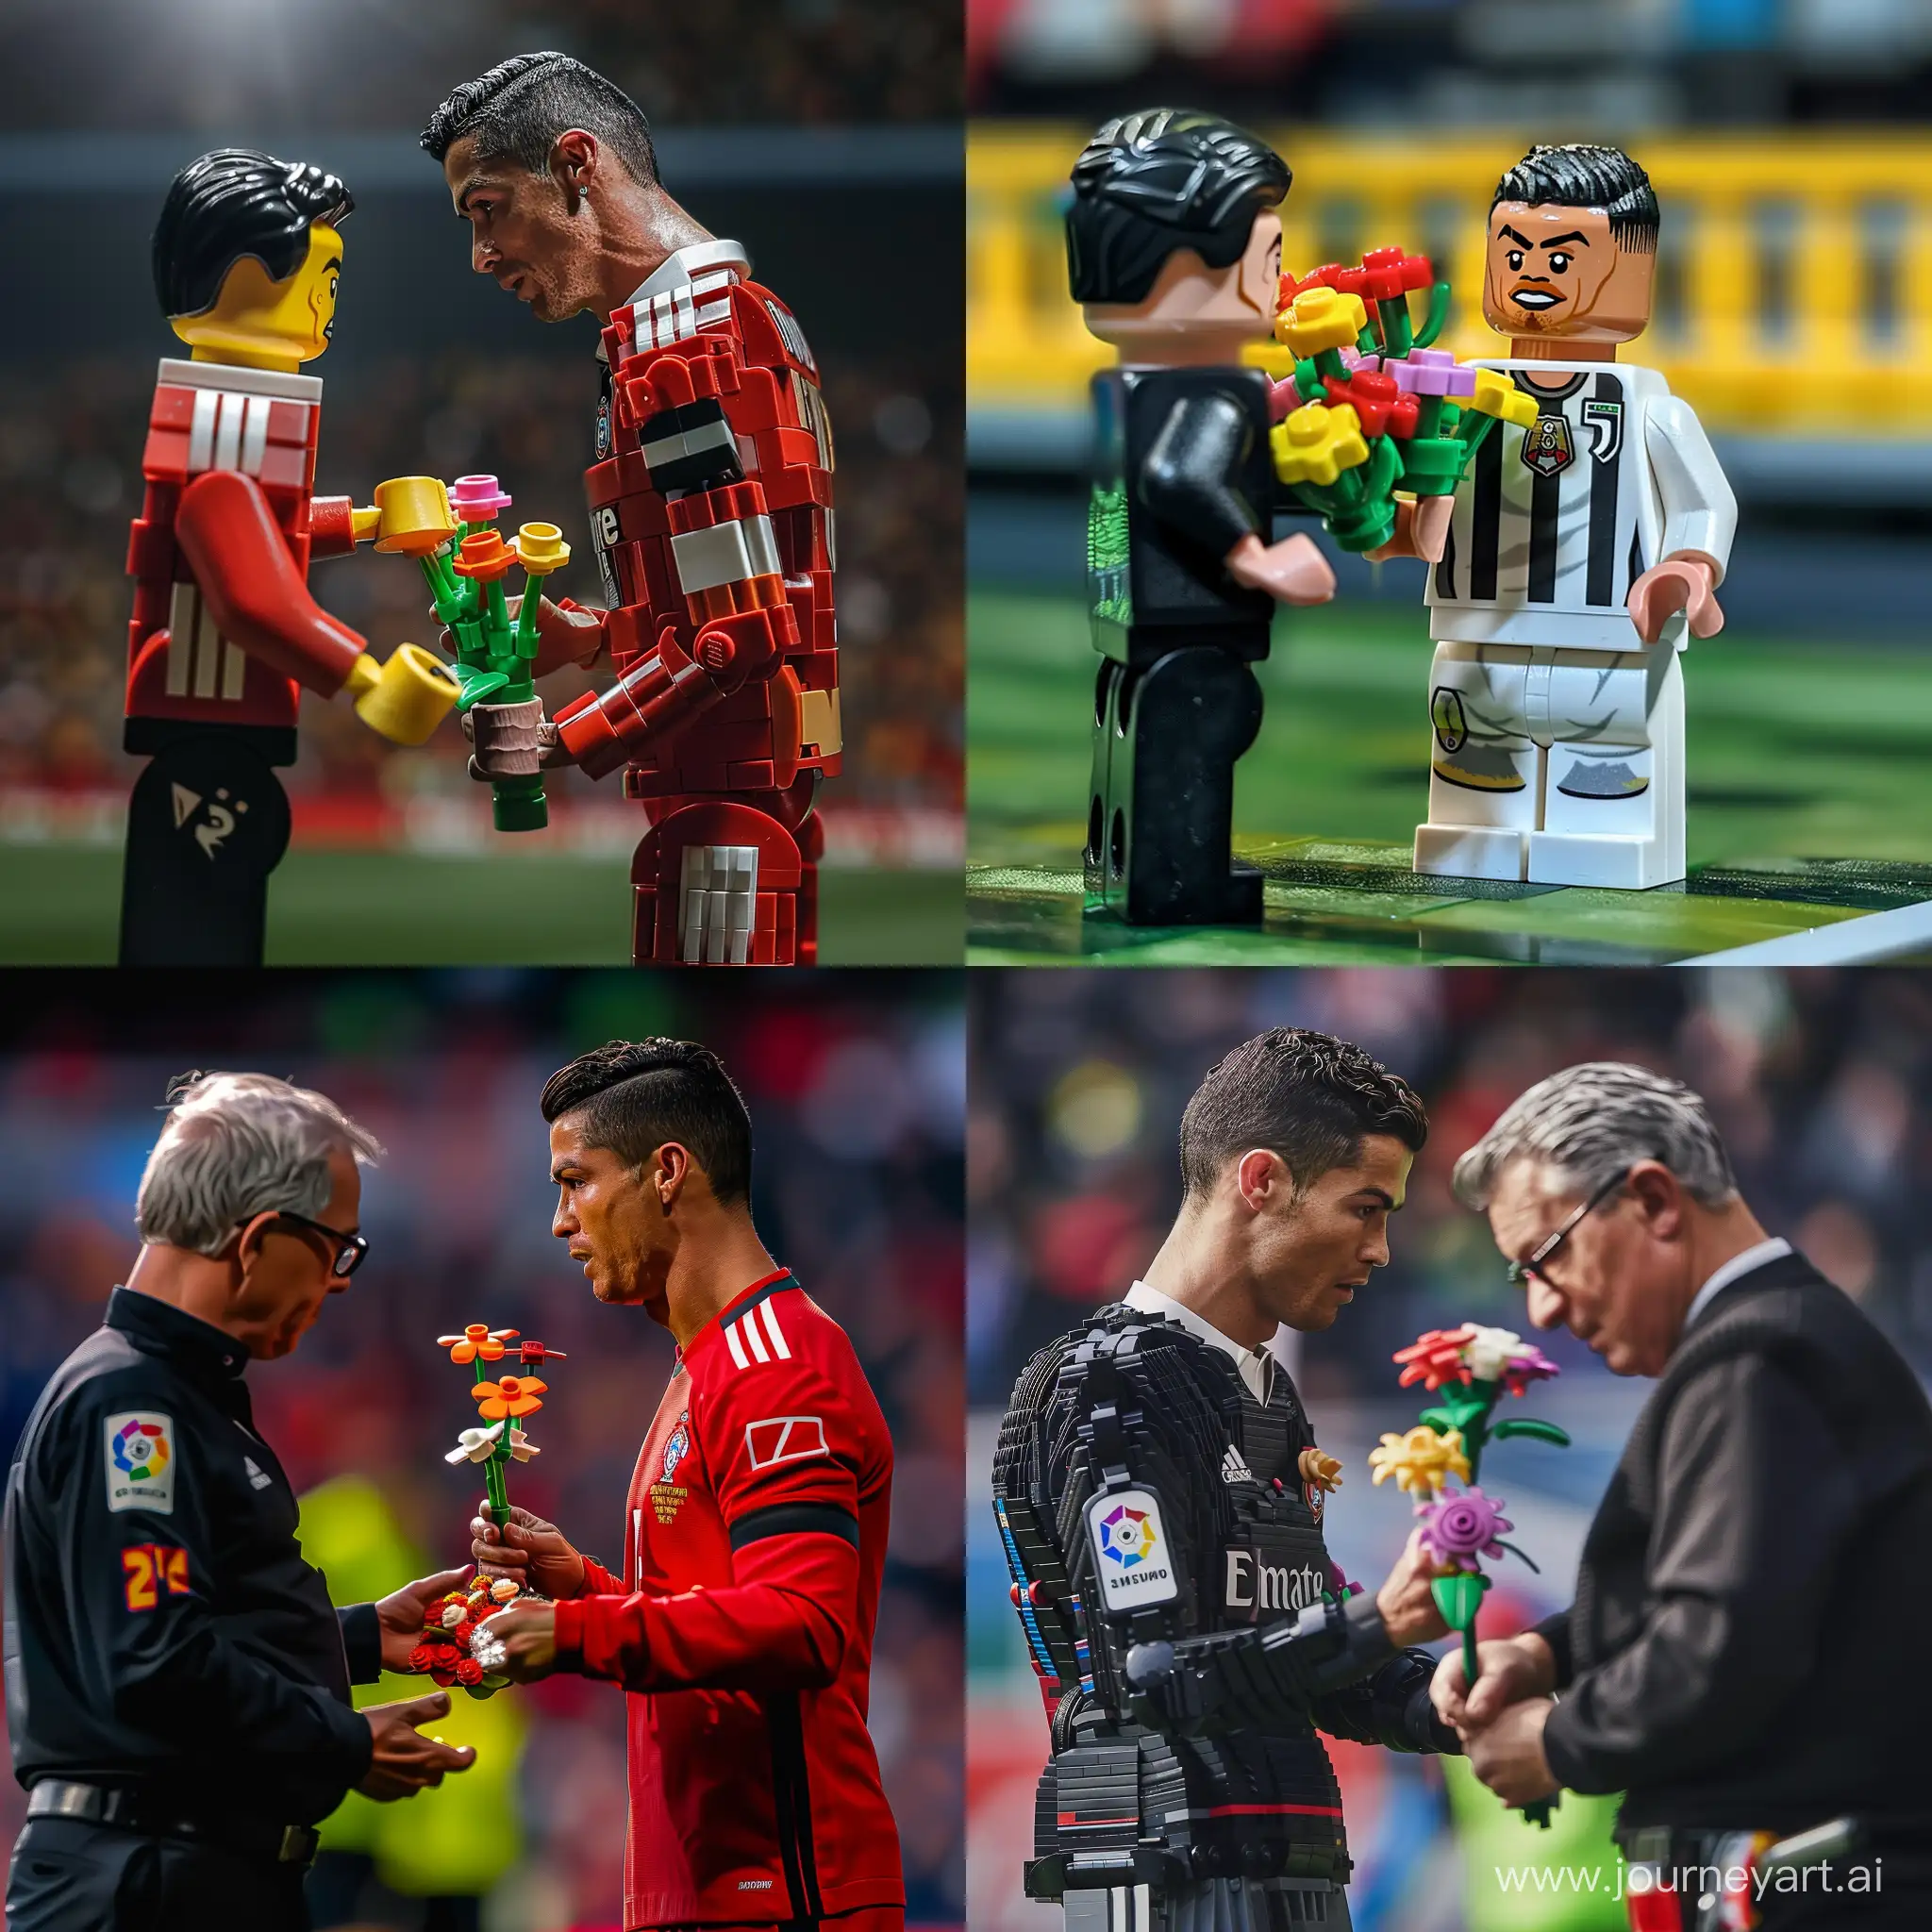 S21-Ronaldo-Presents-Detailed-Lego-Flowers-to-Referee-on-the-Pitch